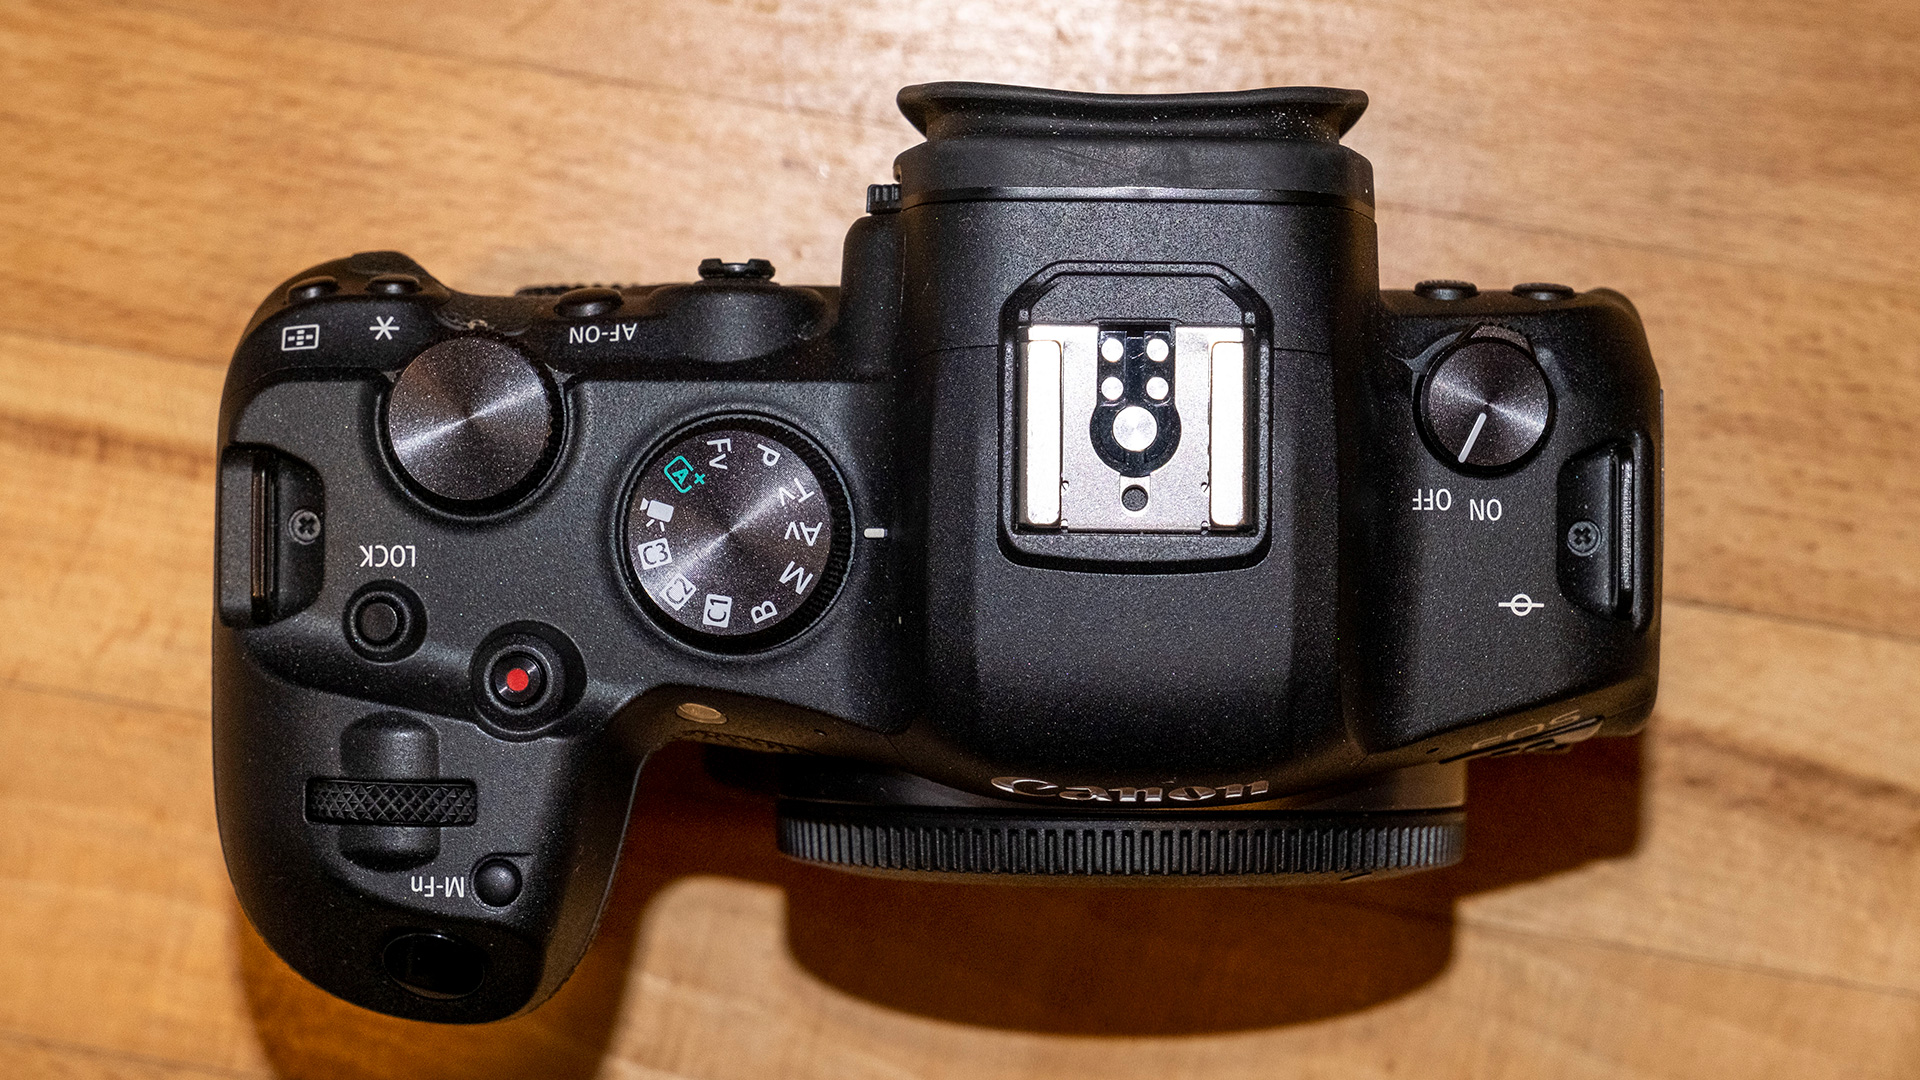 The Canon EOS R6 full-frame mirrorless camera. This shot shows it from above